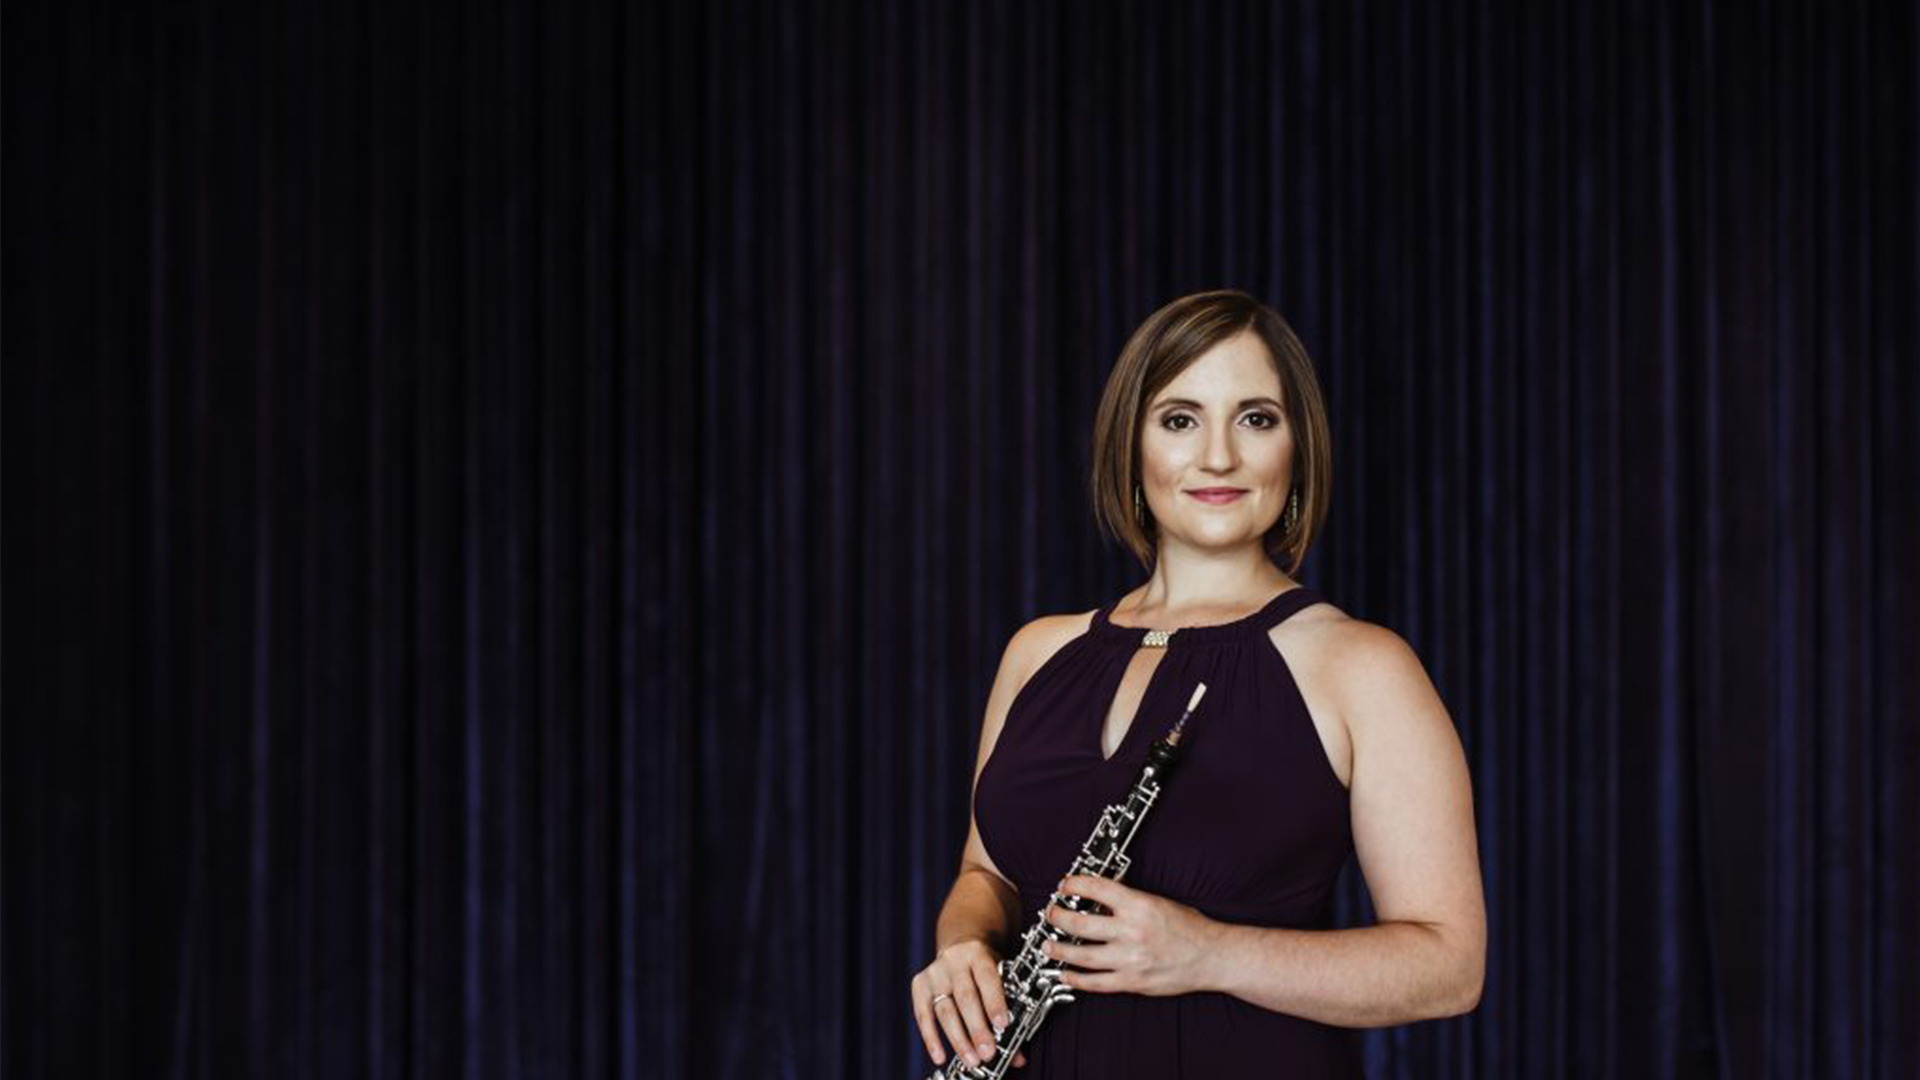 Headshot of Dr. Marchioni with oboe, against dark backdrop